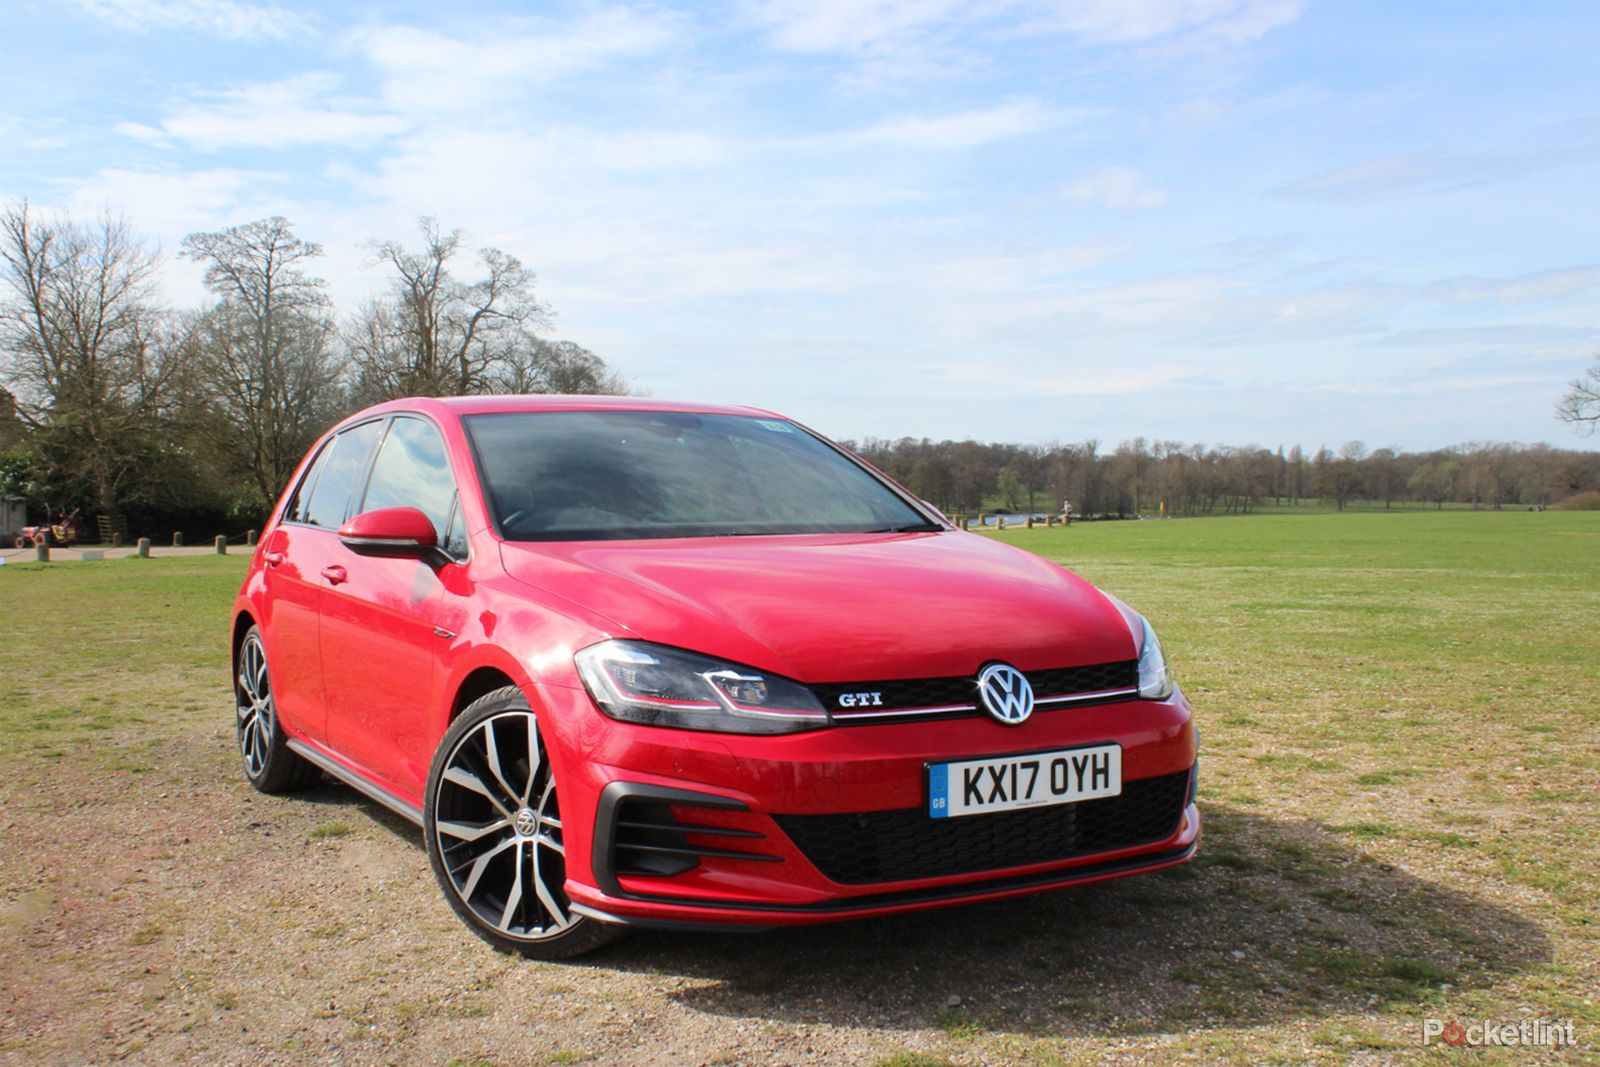 Volkswagen Golf GTI first drive: The hot hatch that transcends